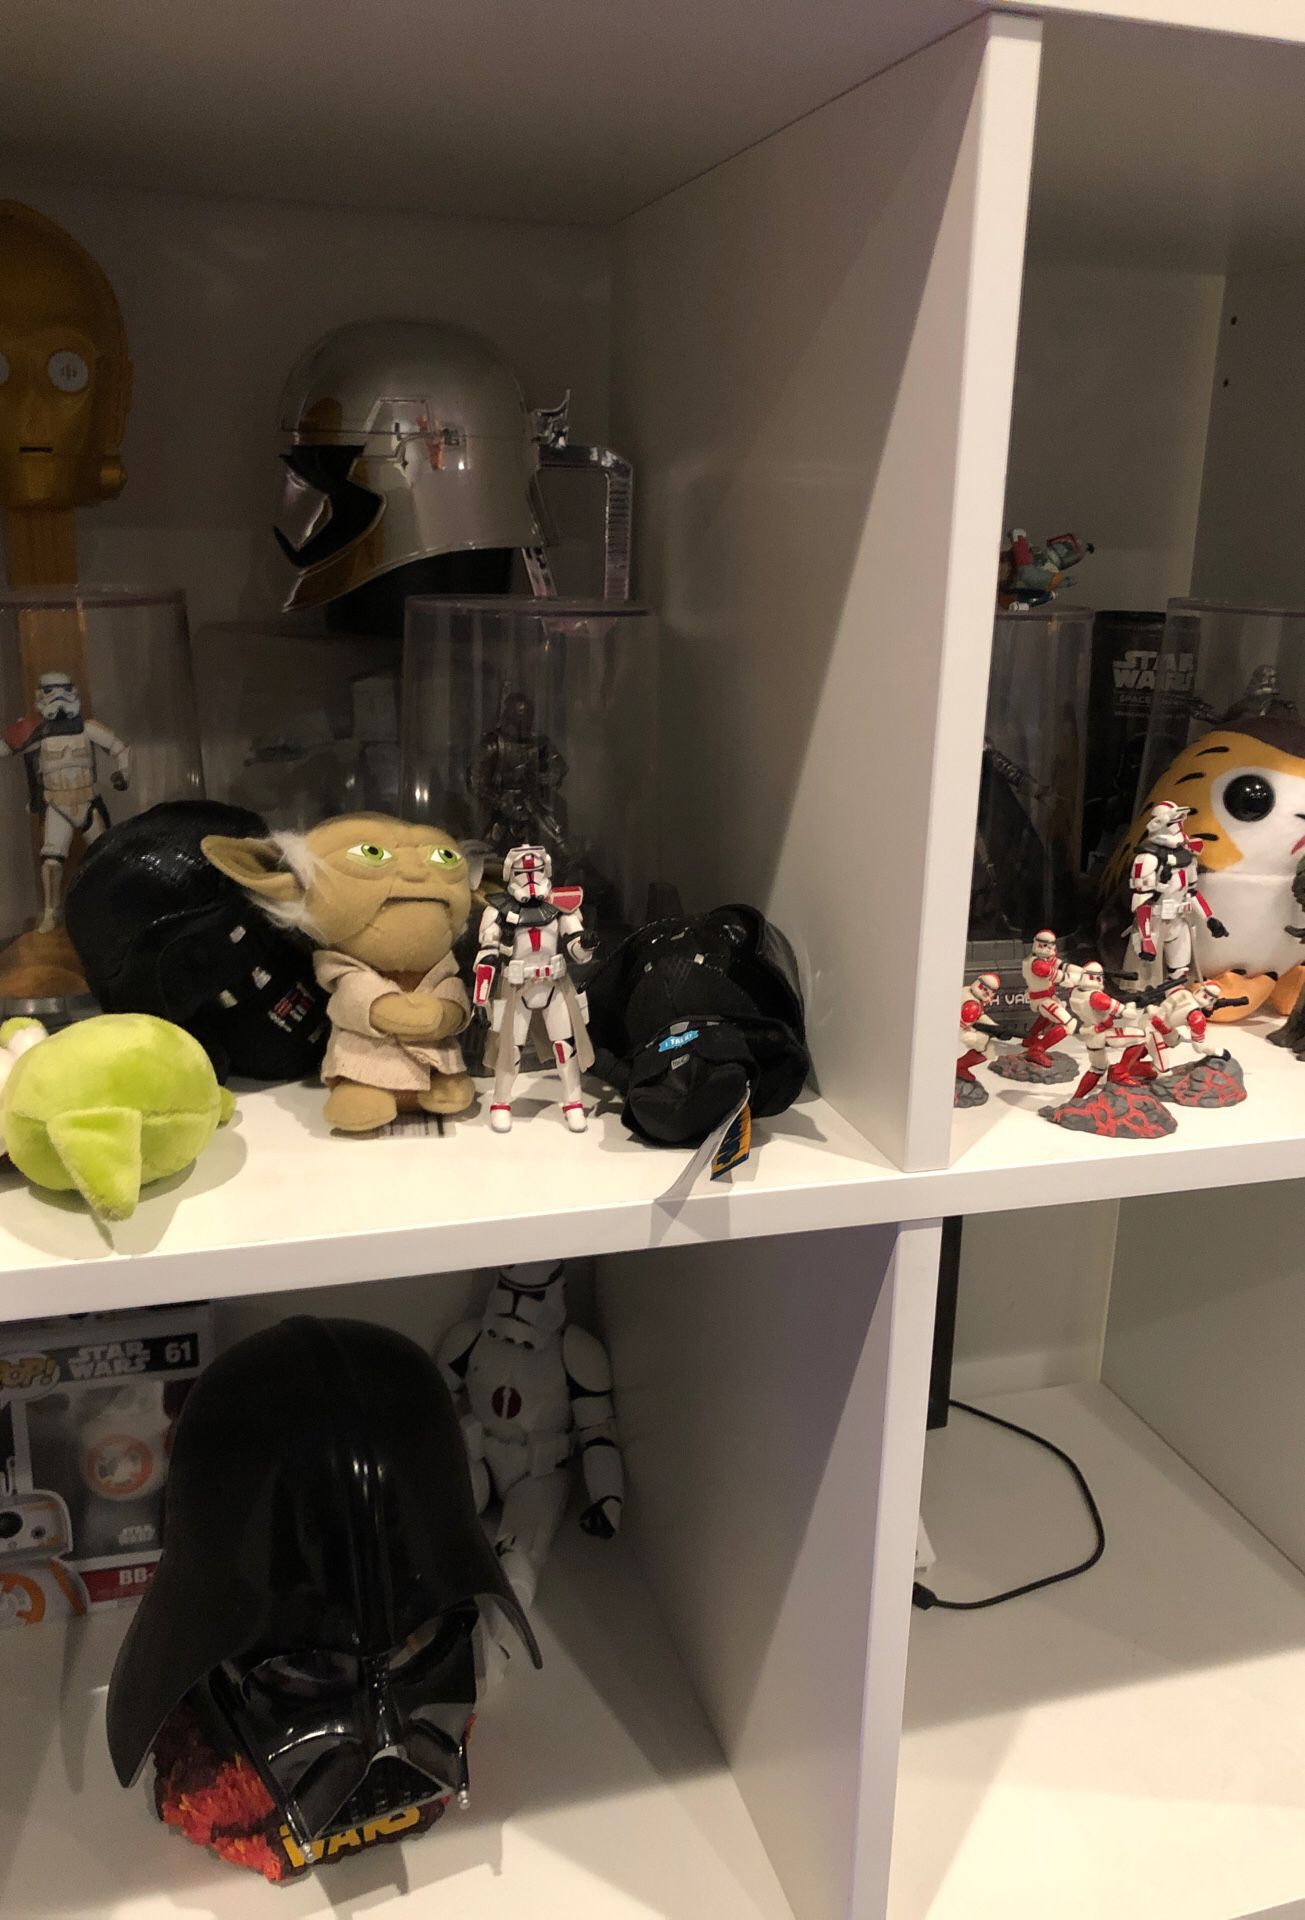 Star wars collectibles